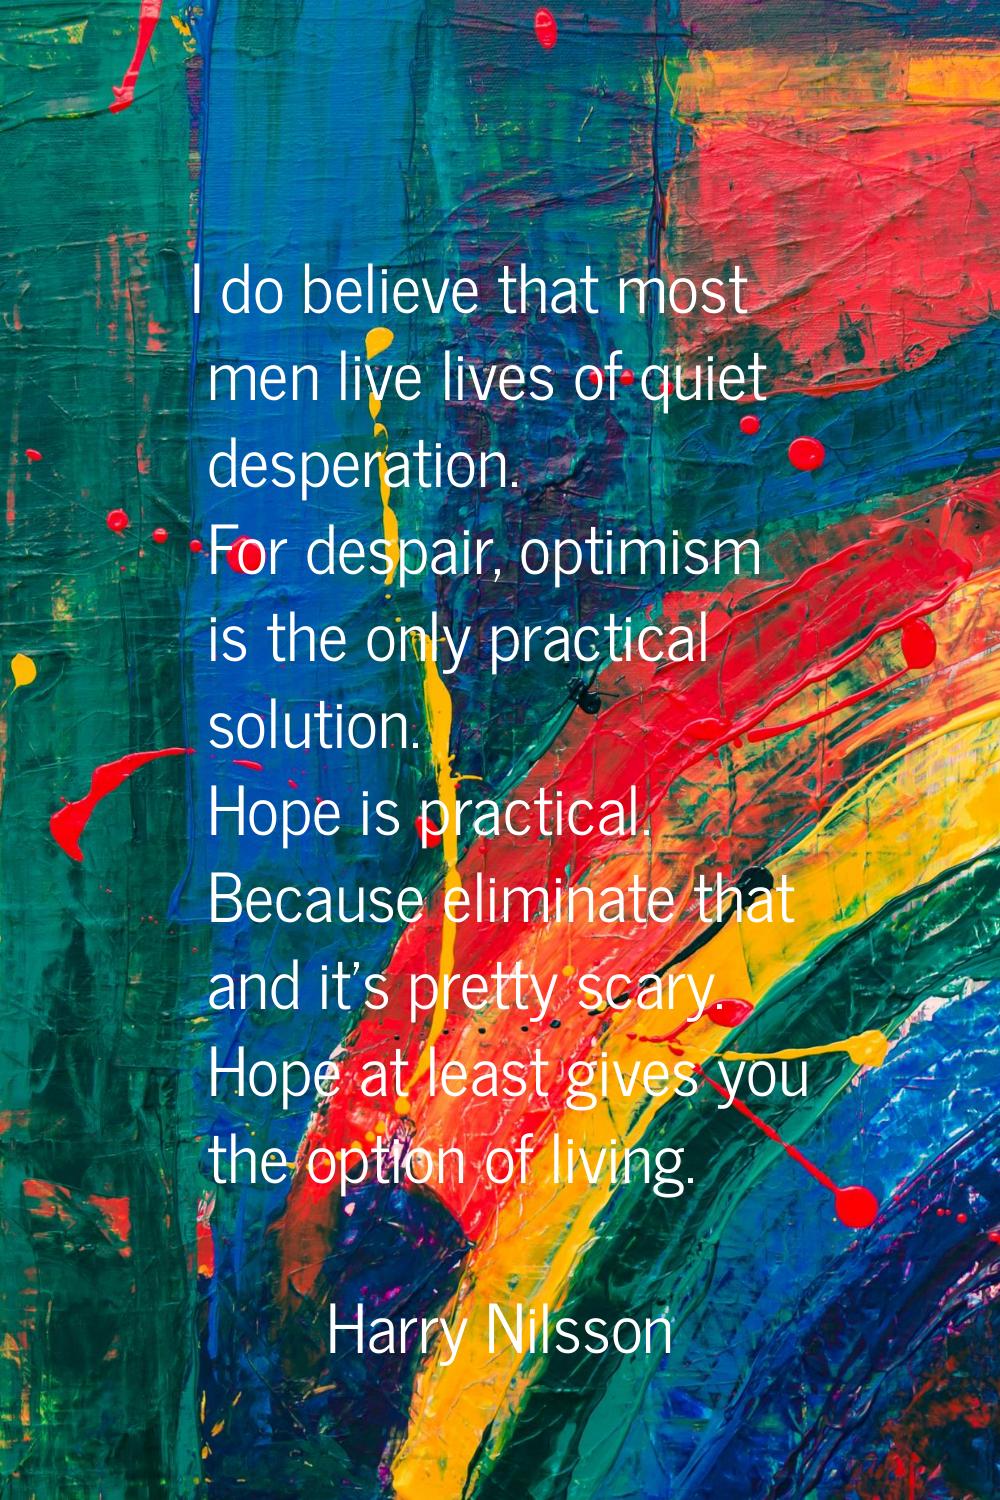 I do believe that most men live lives of quiet desperation. For despair, optimism is the only pract